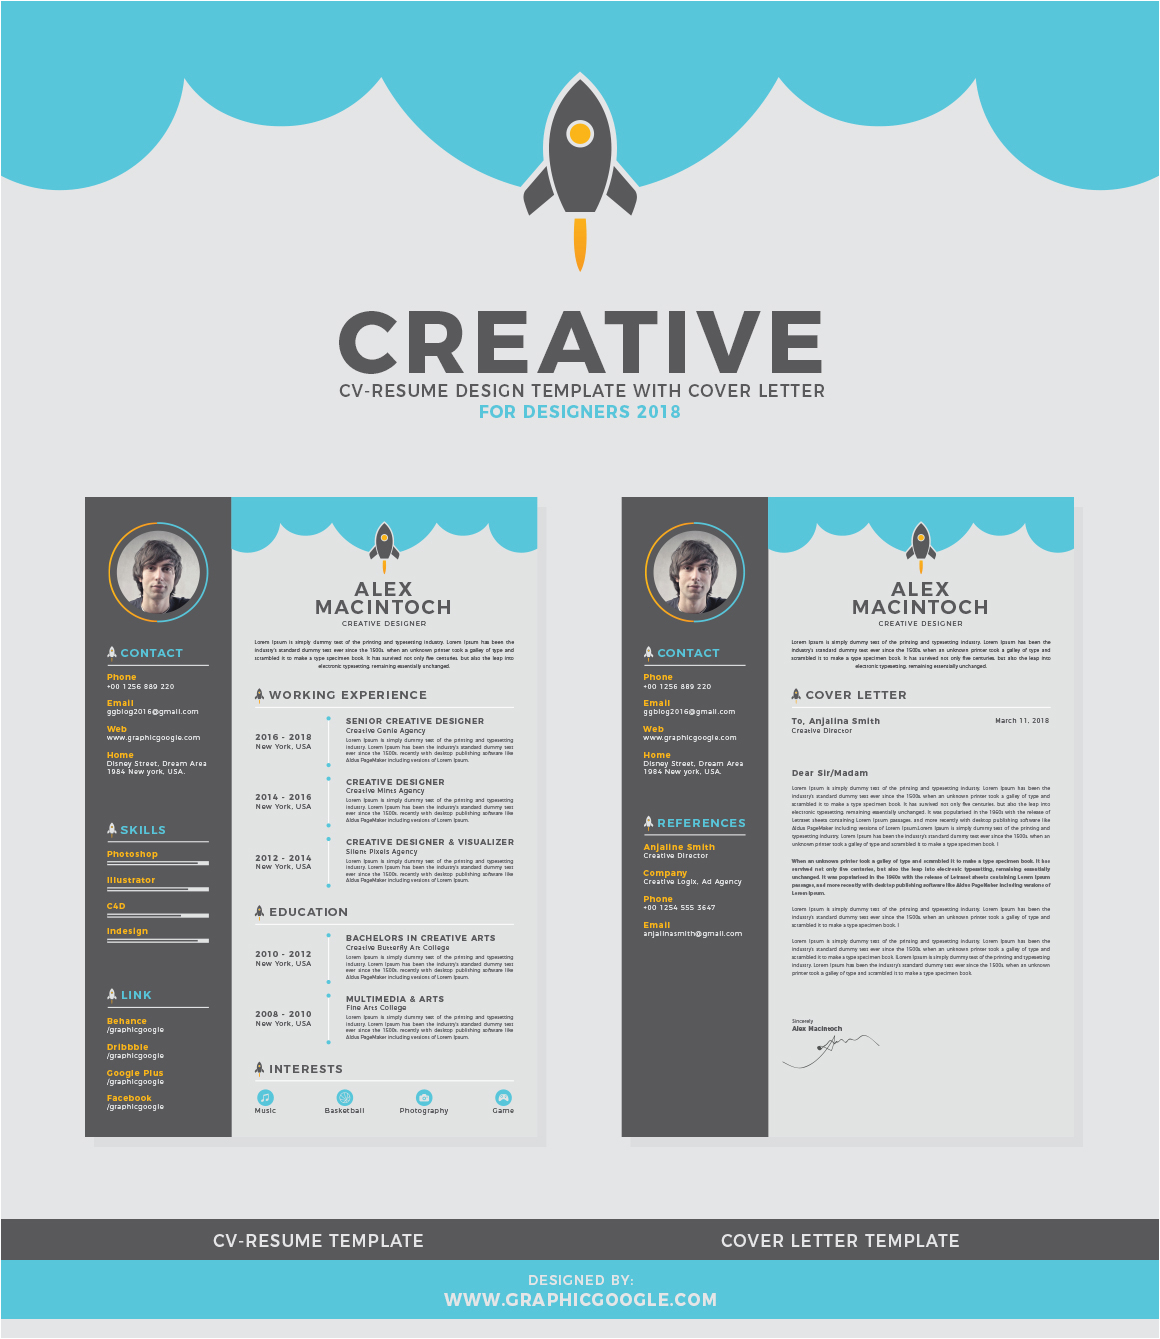 Creative Resume Templates for Graphic Designers Free Creative Cv Resume Design Template with Cover Letter